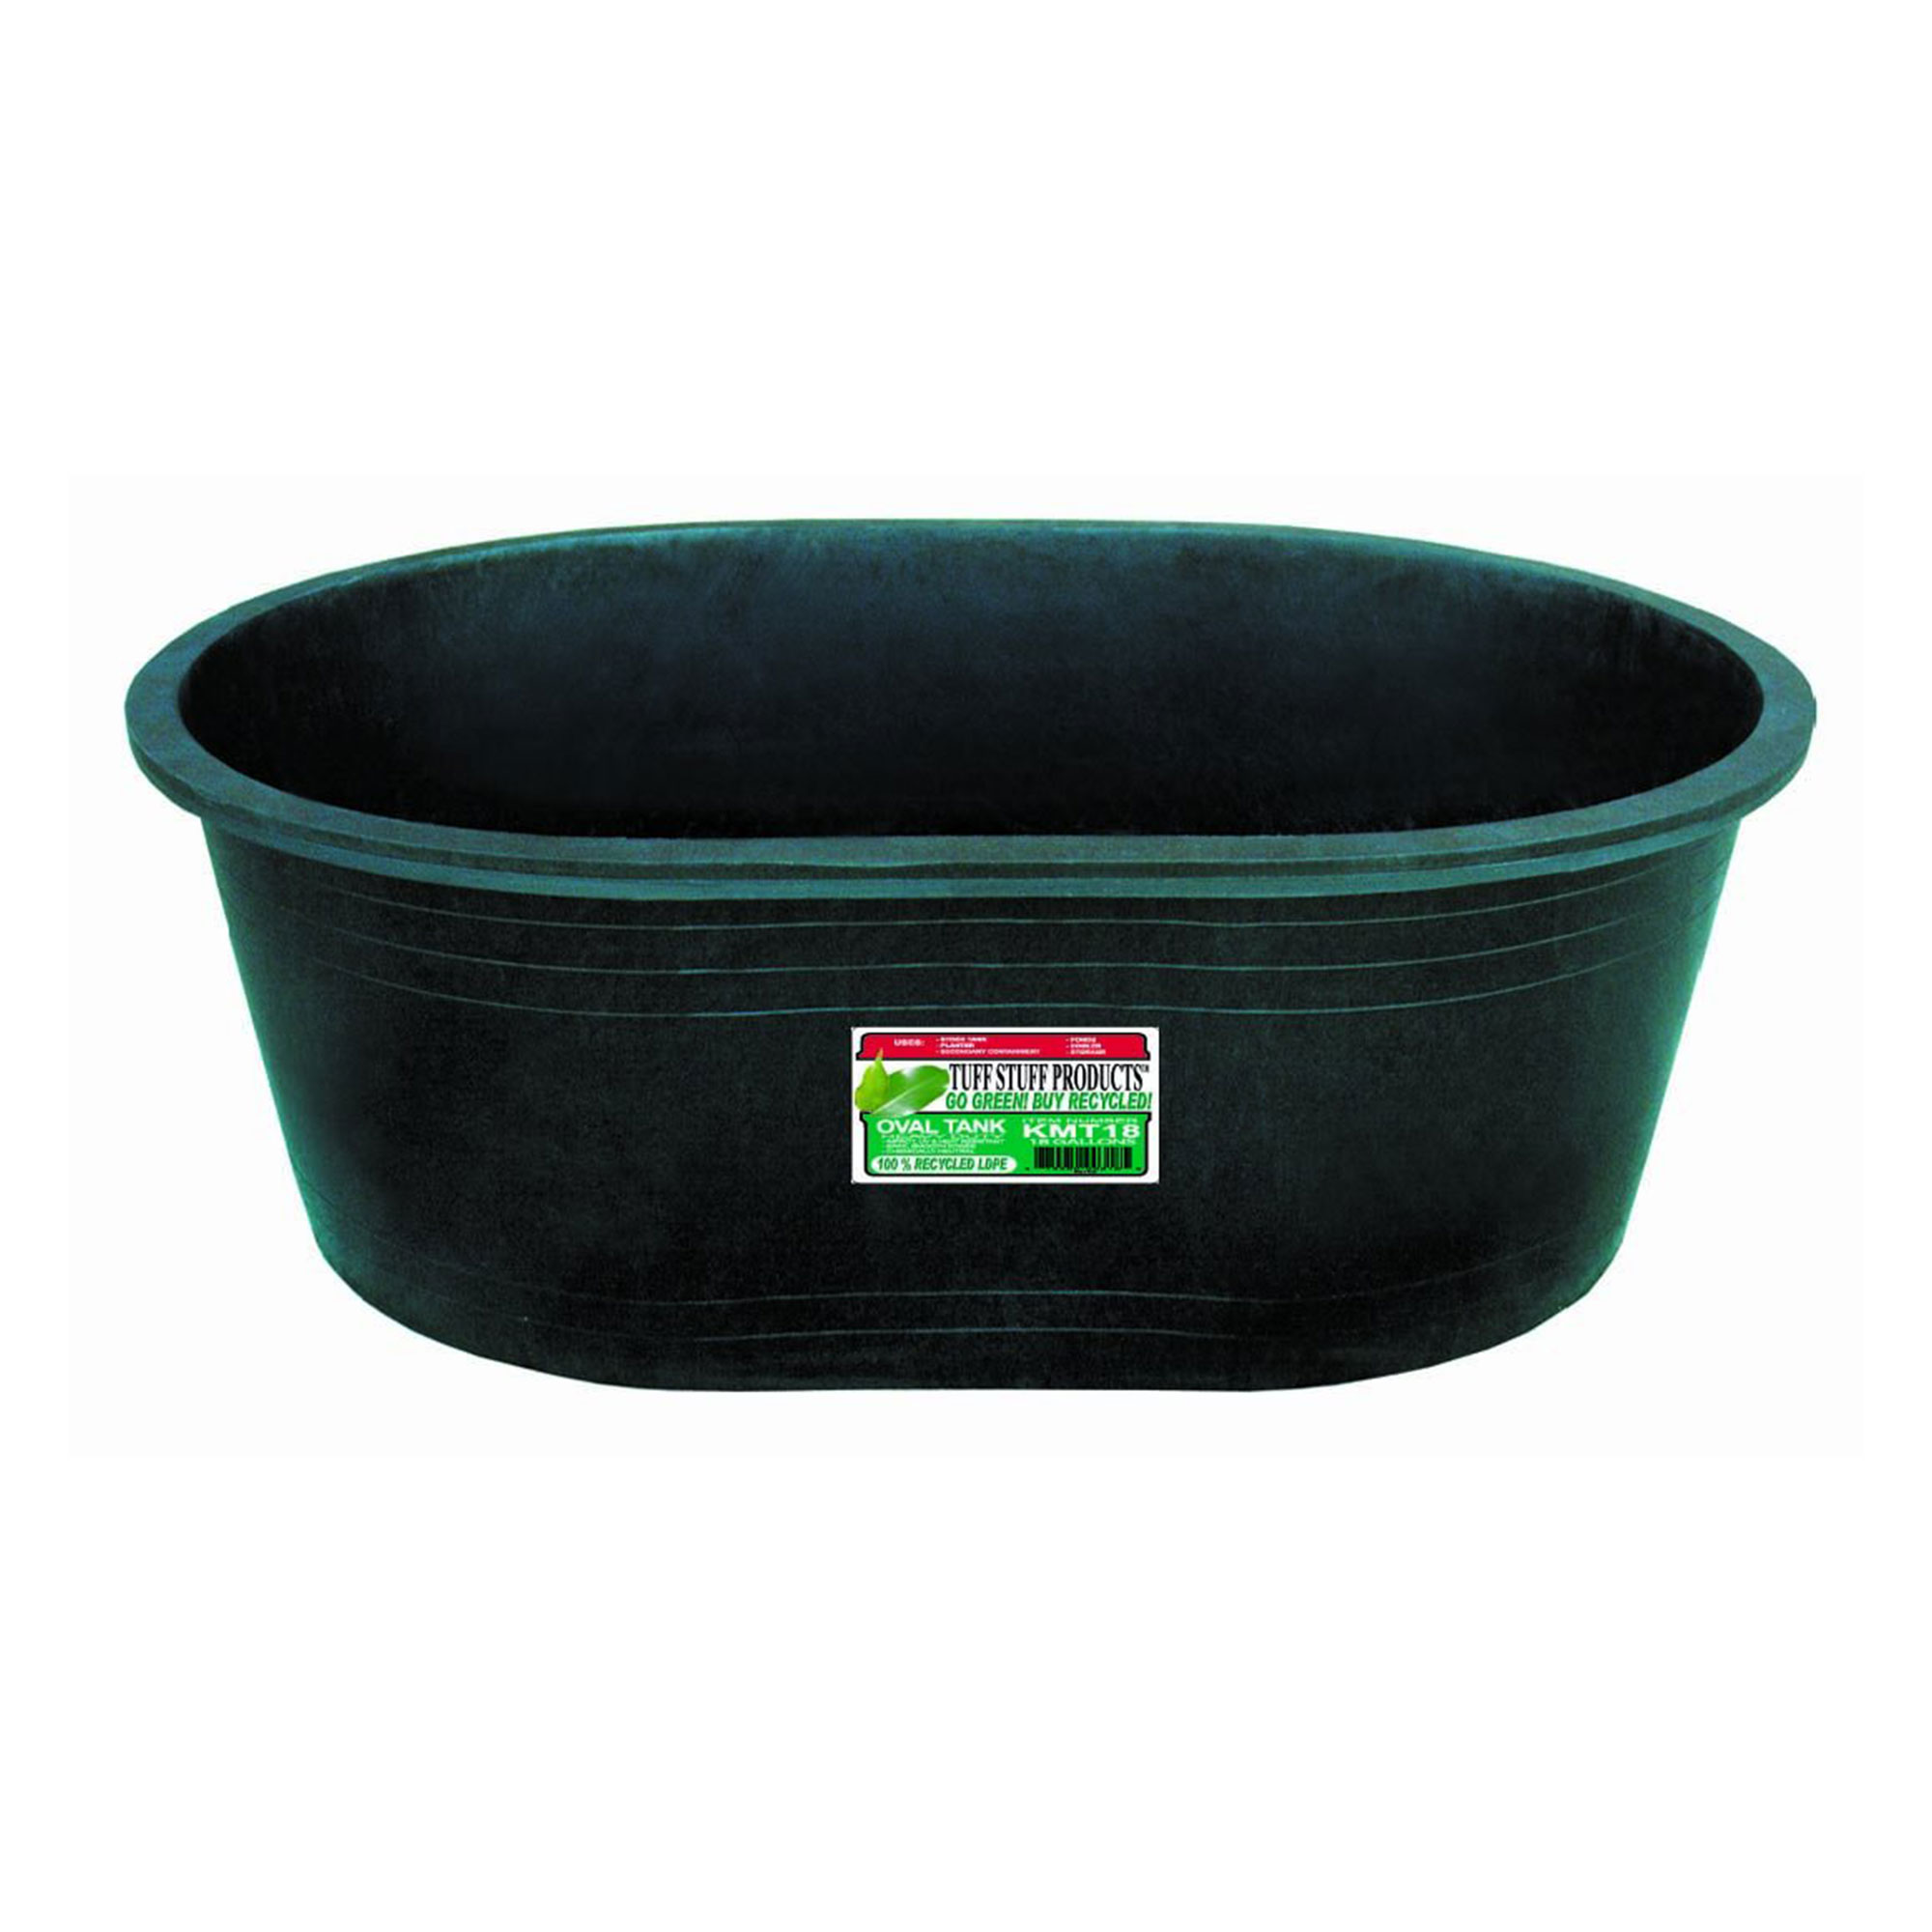 Details About Tuff Stuff Heavy Duty 18 Gallon Oval Water Feed Or Storage Tank Tub Green